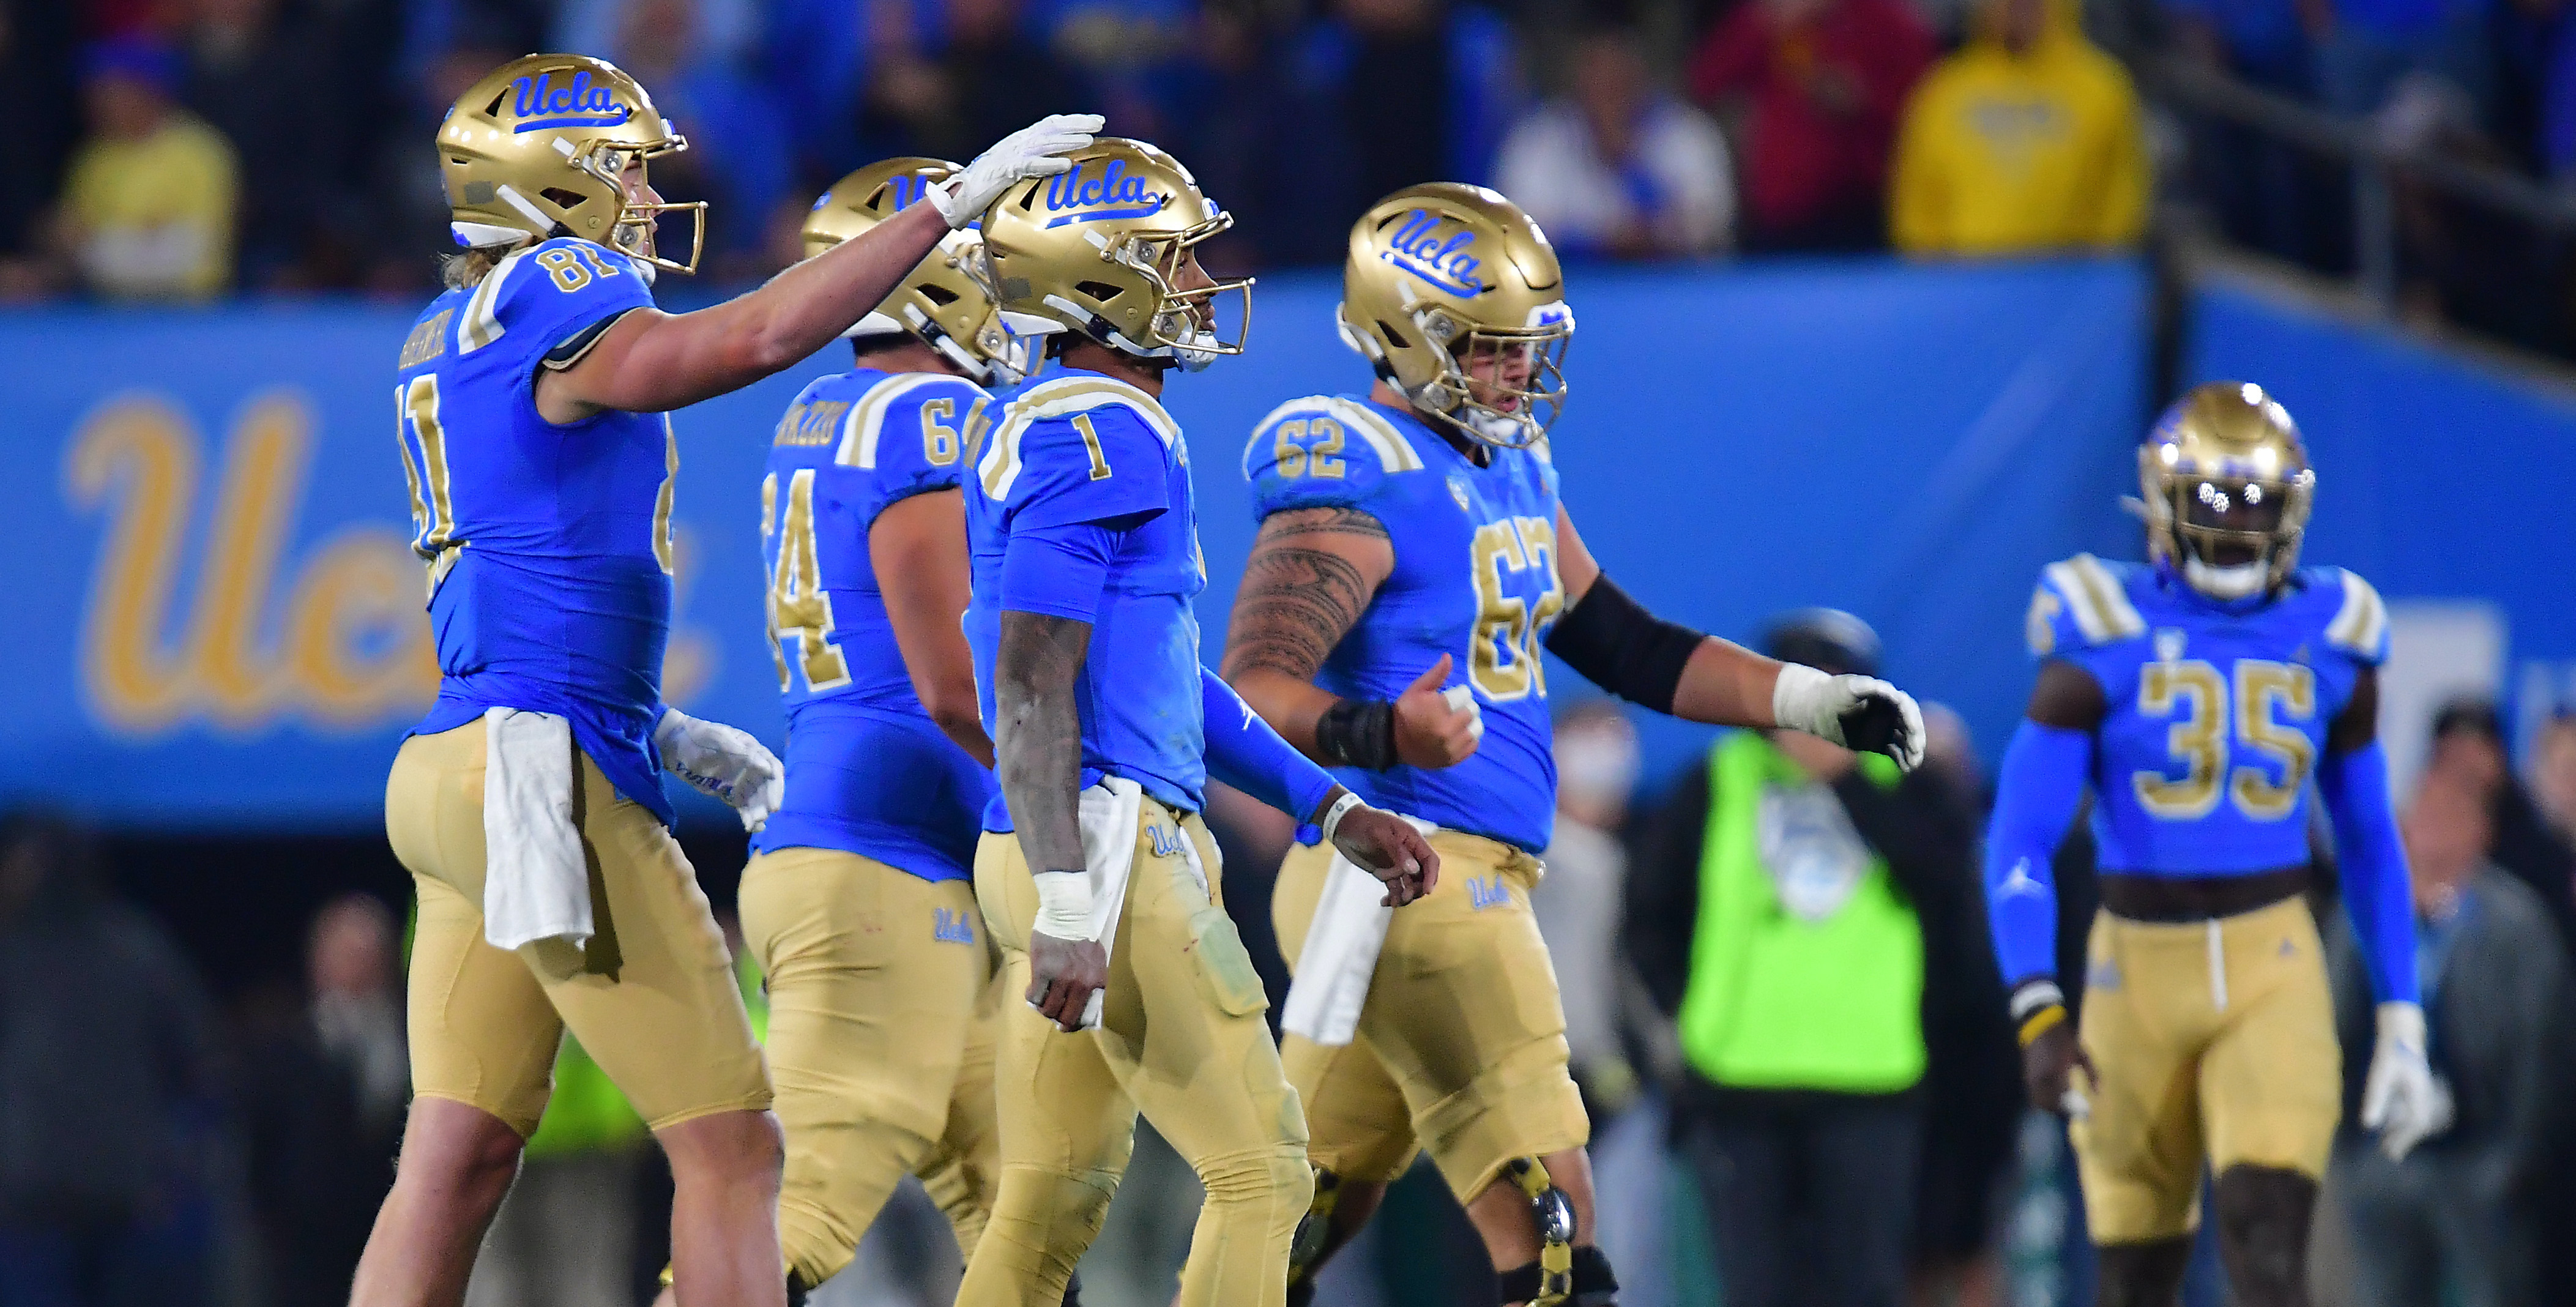 UCLA vs. Pittsburgh Sun Bowl How to Watch, Game Info, Betting Odds